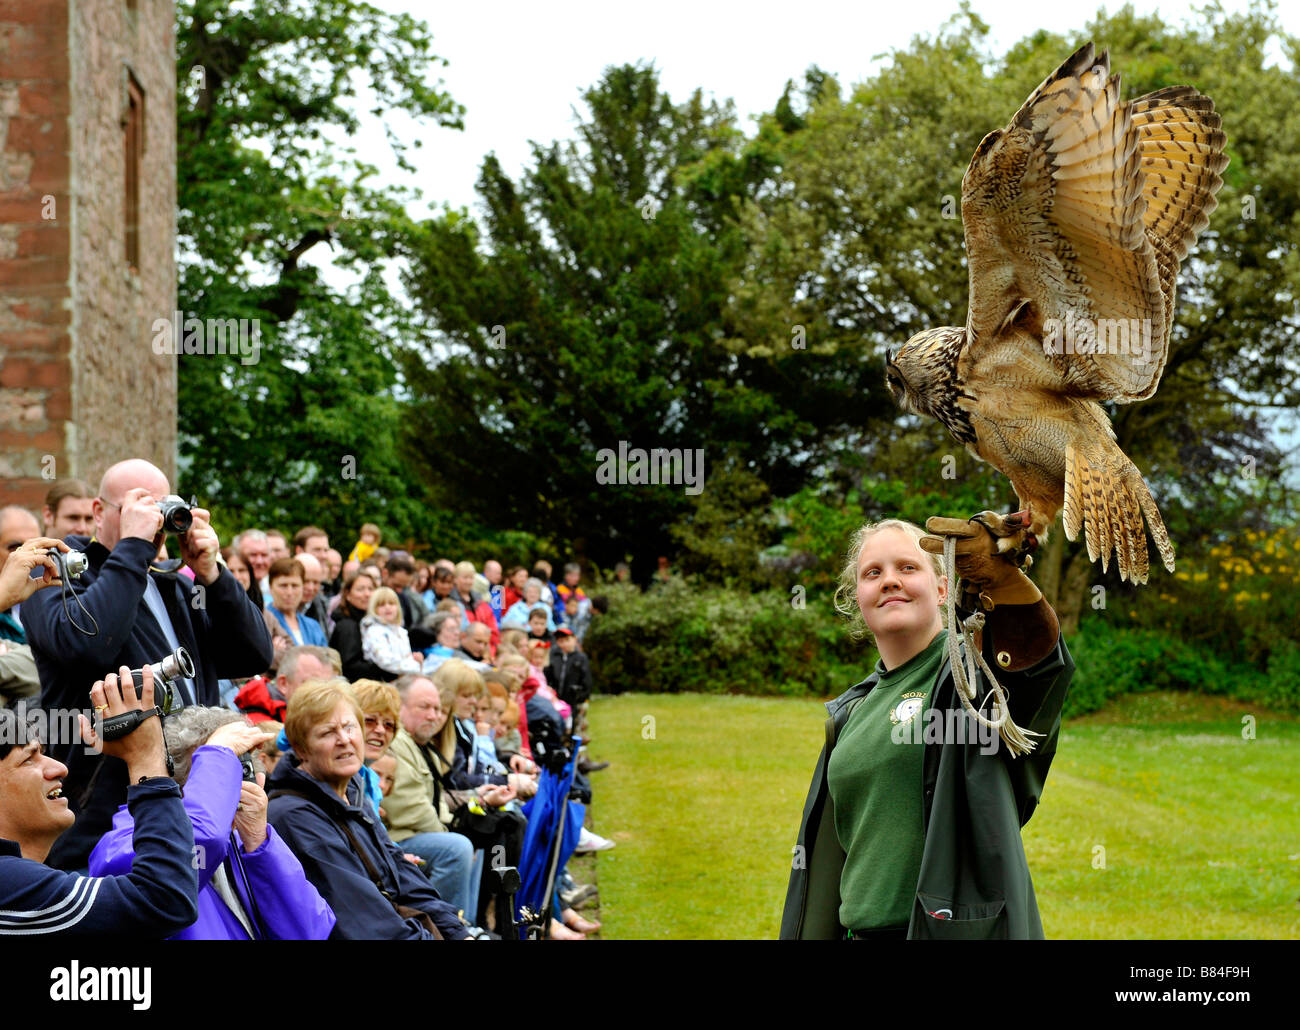 Crowds watch the owl display European Eagle Owl Bubo Bubo and falconry handler at World Owl Trust Muncaster Castle Cumbria Stock Photo